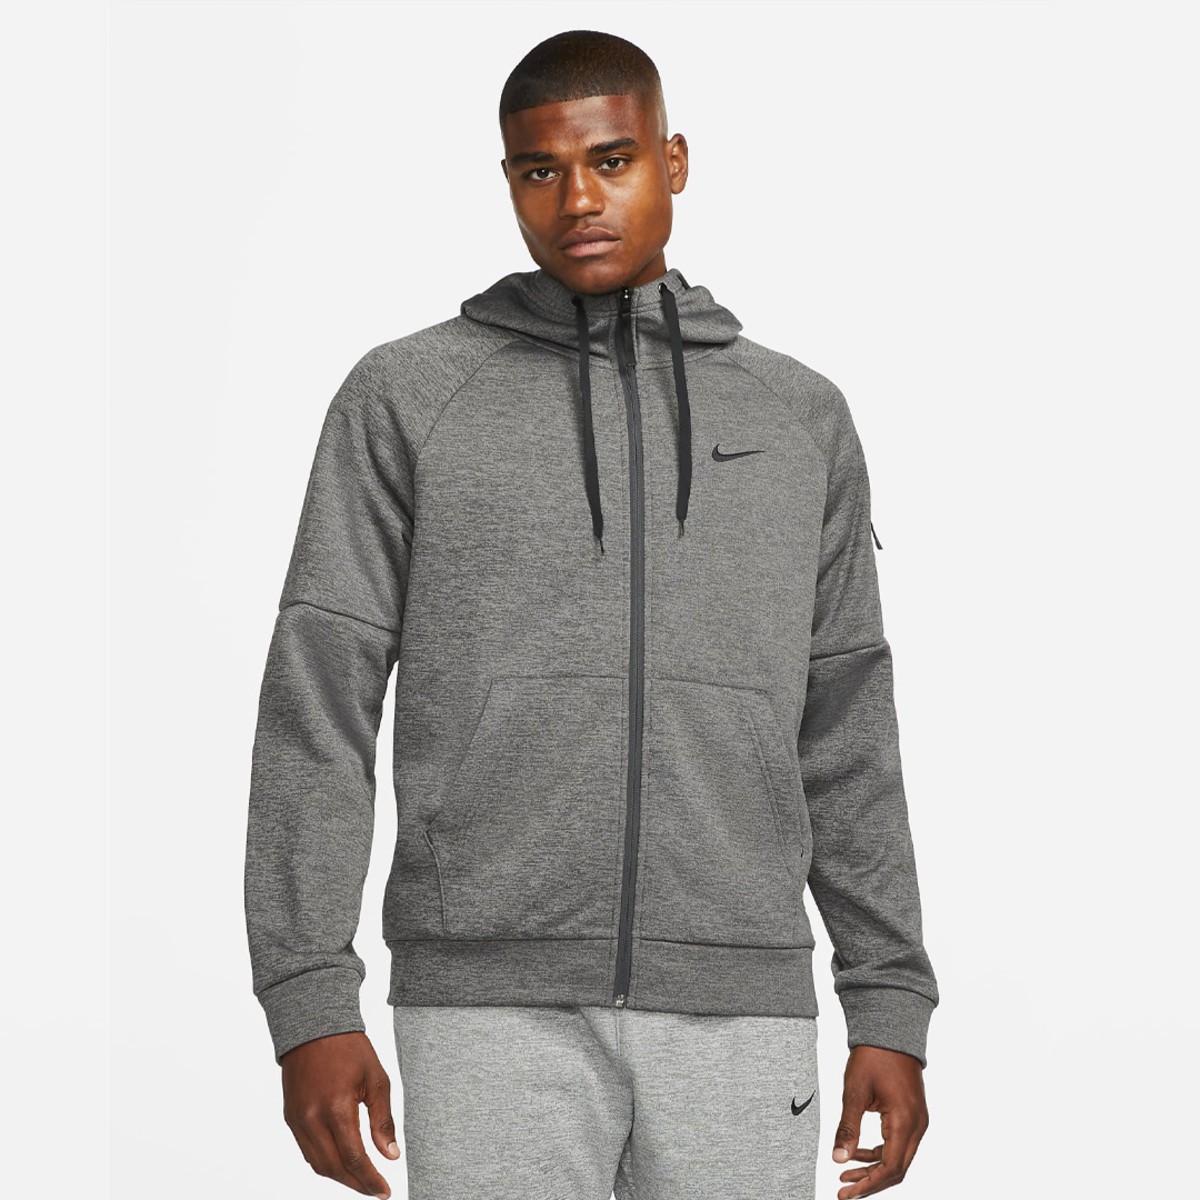 Early Nike Black Friday Deals Are Live and Up to 60% Off - Men's Journal